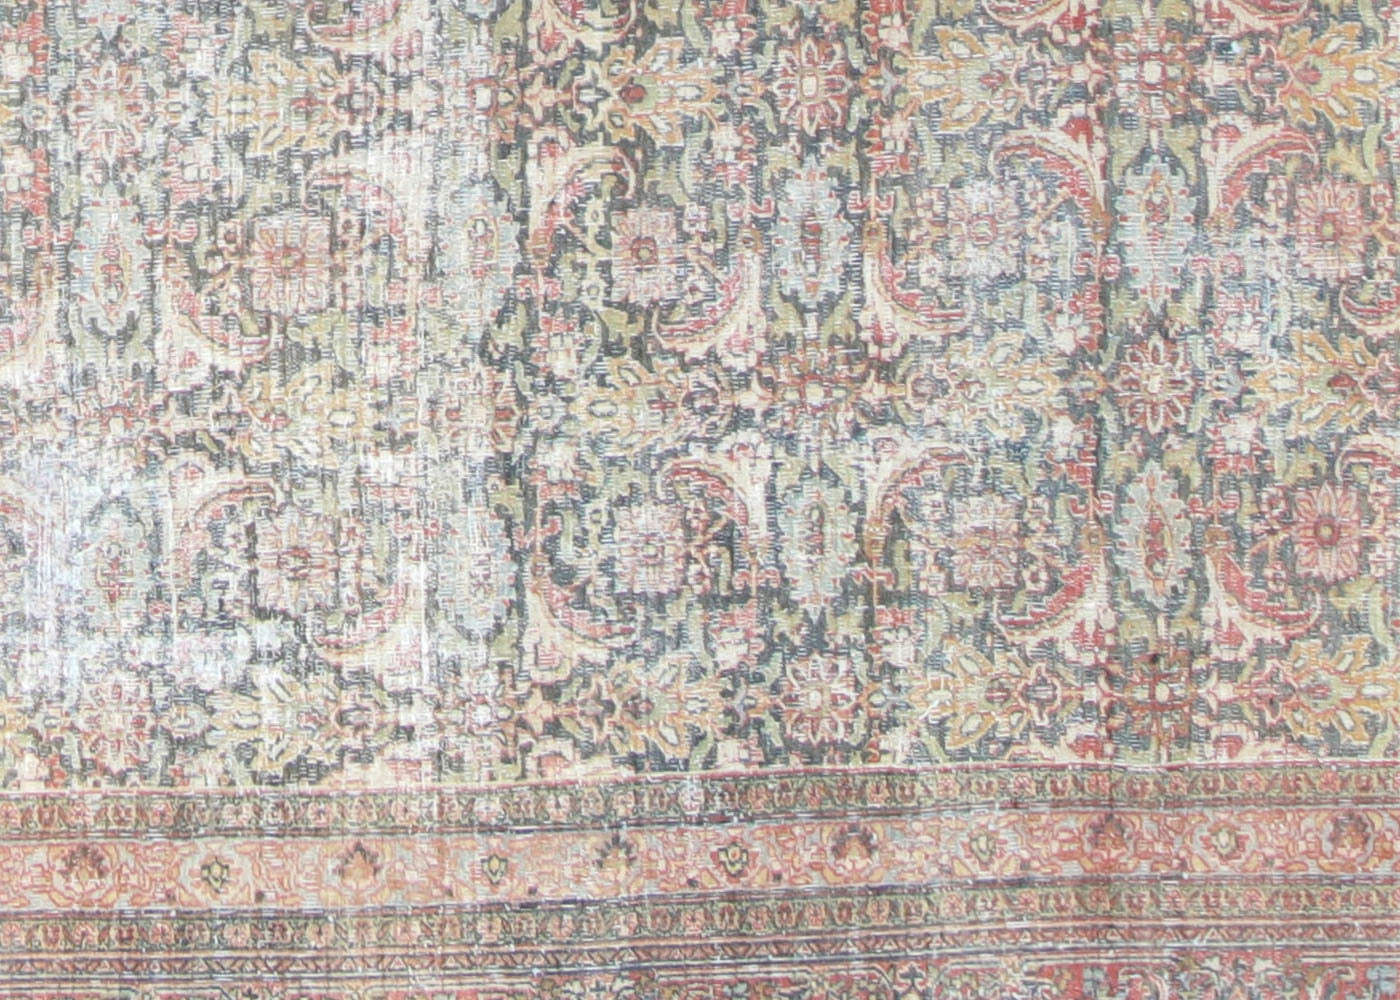 Antique Persian Meshed Rug - 12'6" x 18'2"